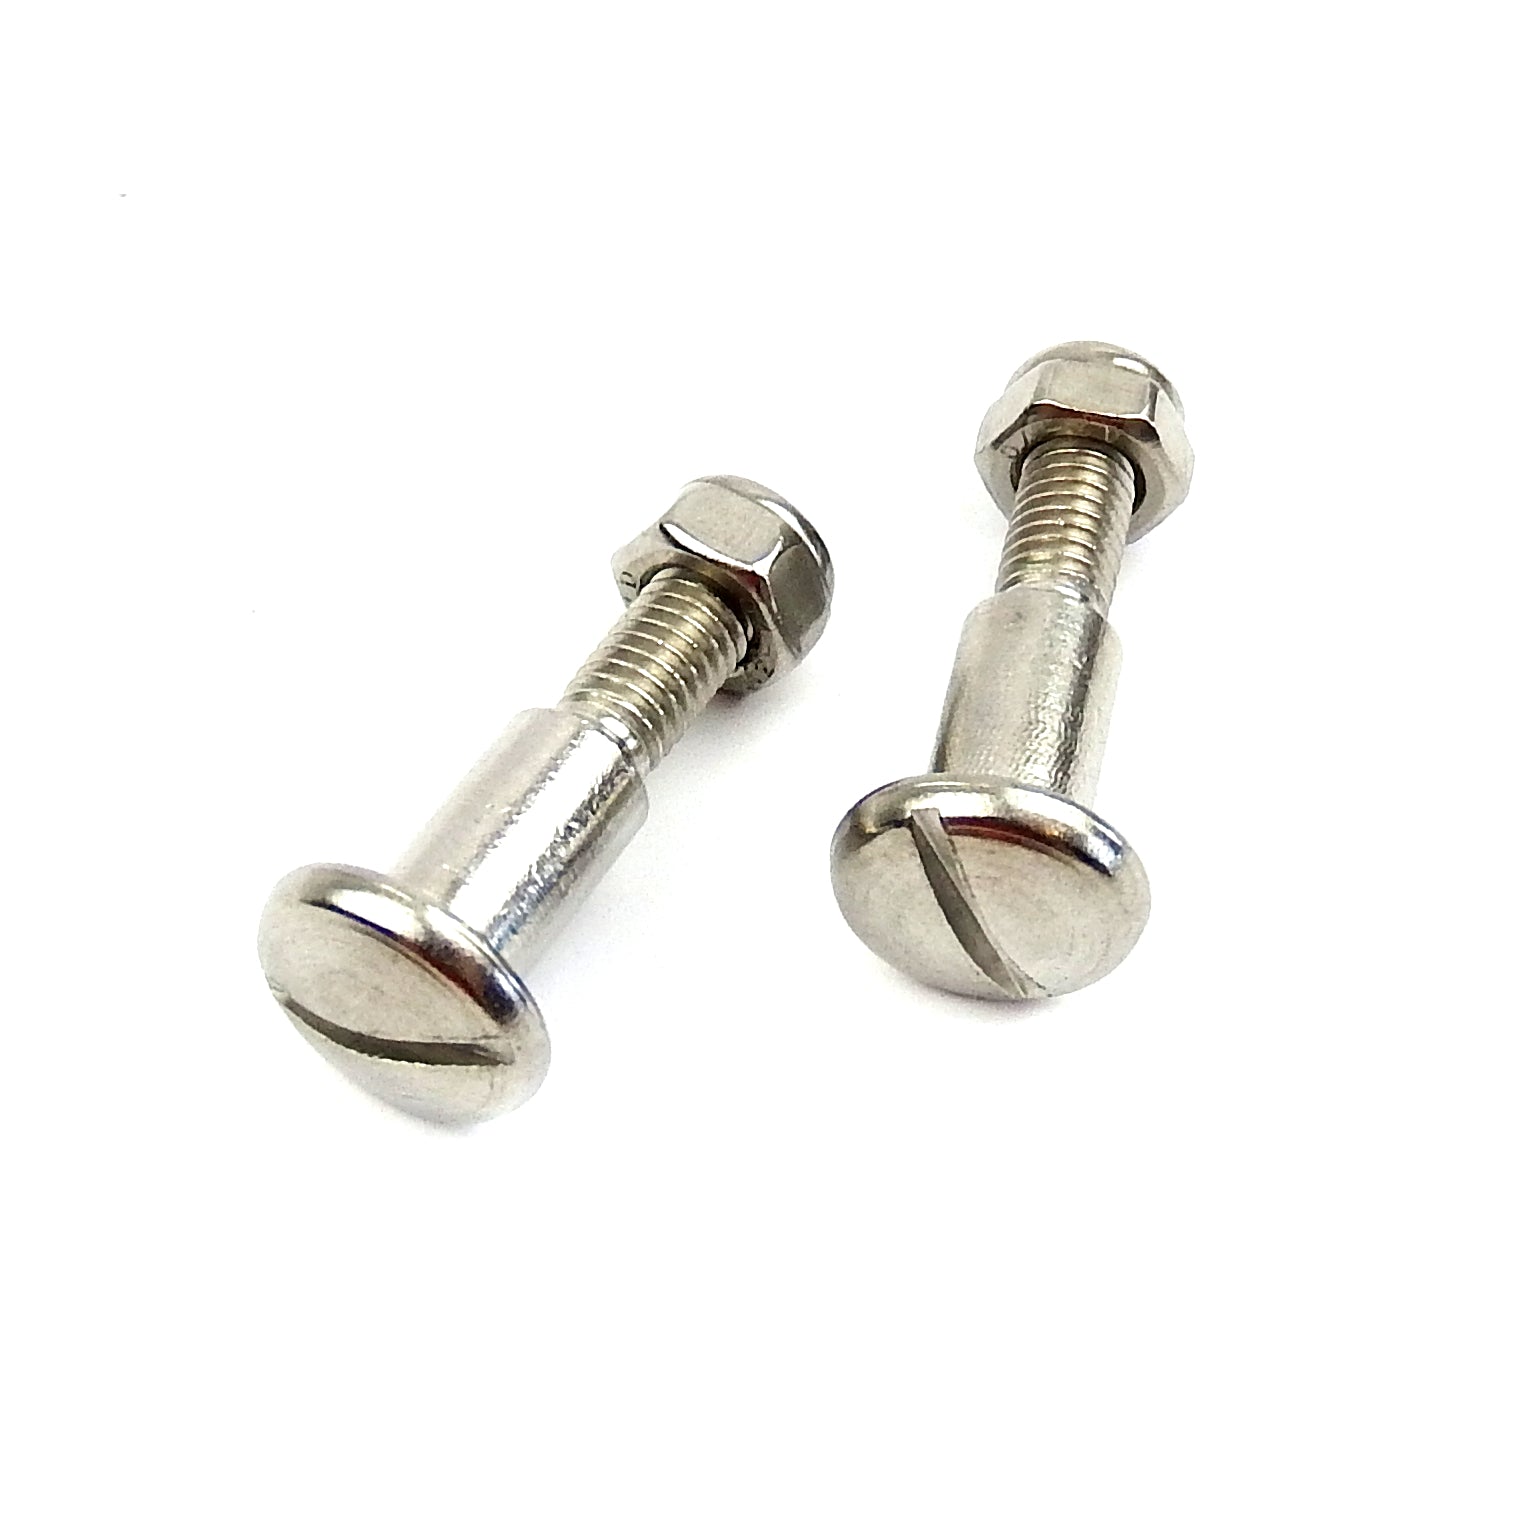 Vespa PX Disc Handle Bar Lever Pivot Bolts - Stainless Steel